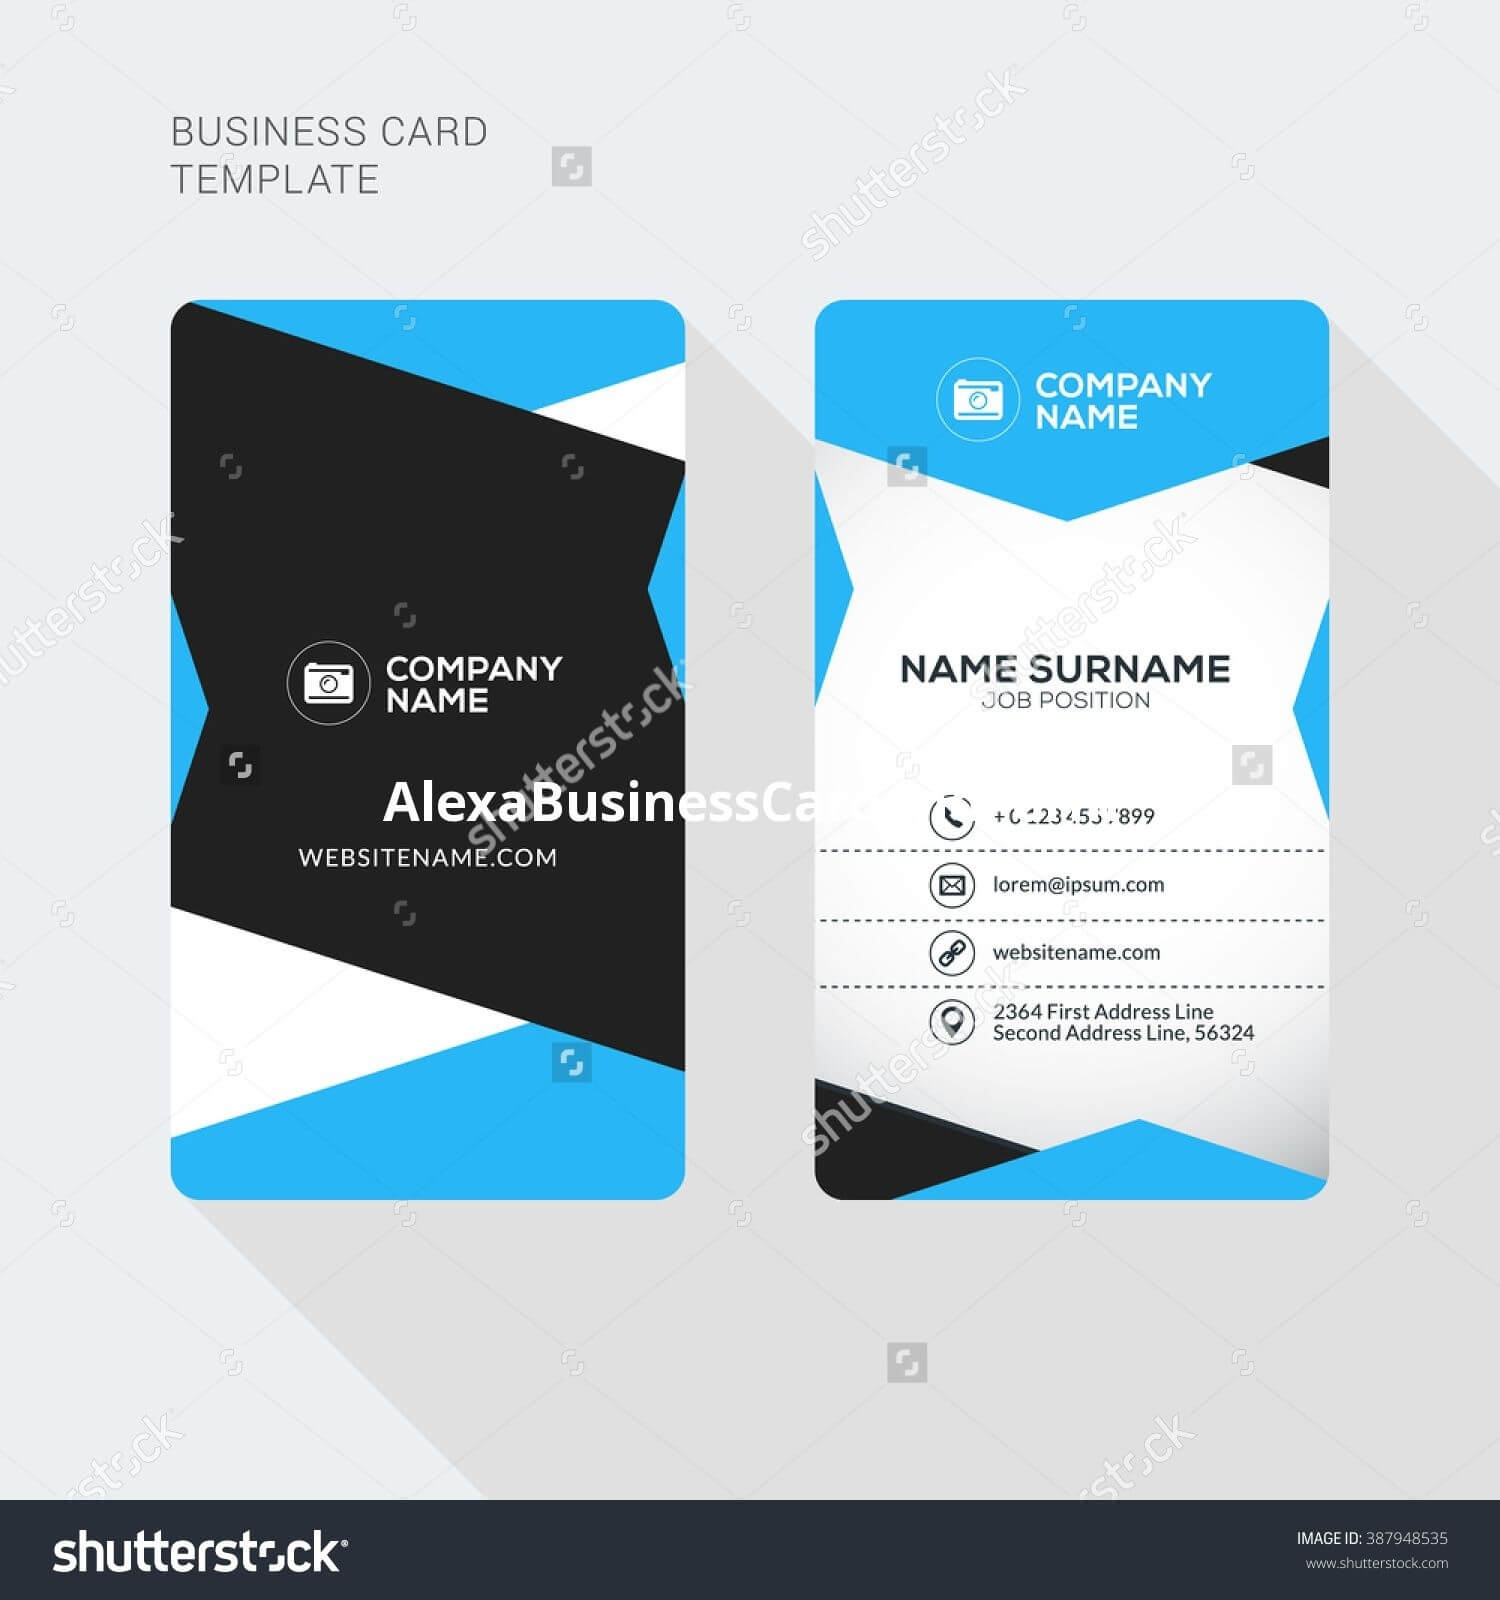 Two Sided Business Cards Template Word Professional Regarding 2 Sided Business Card Template Word